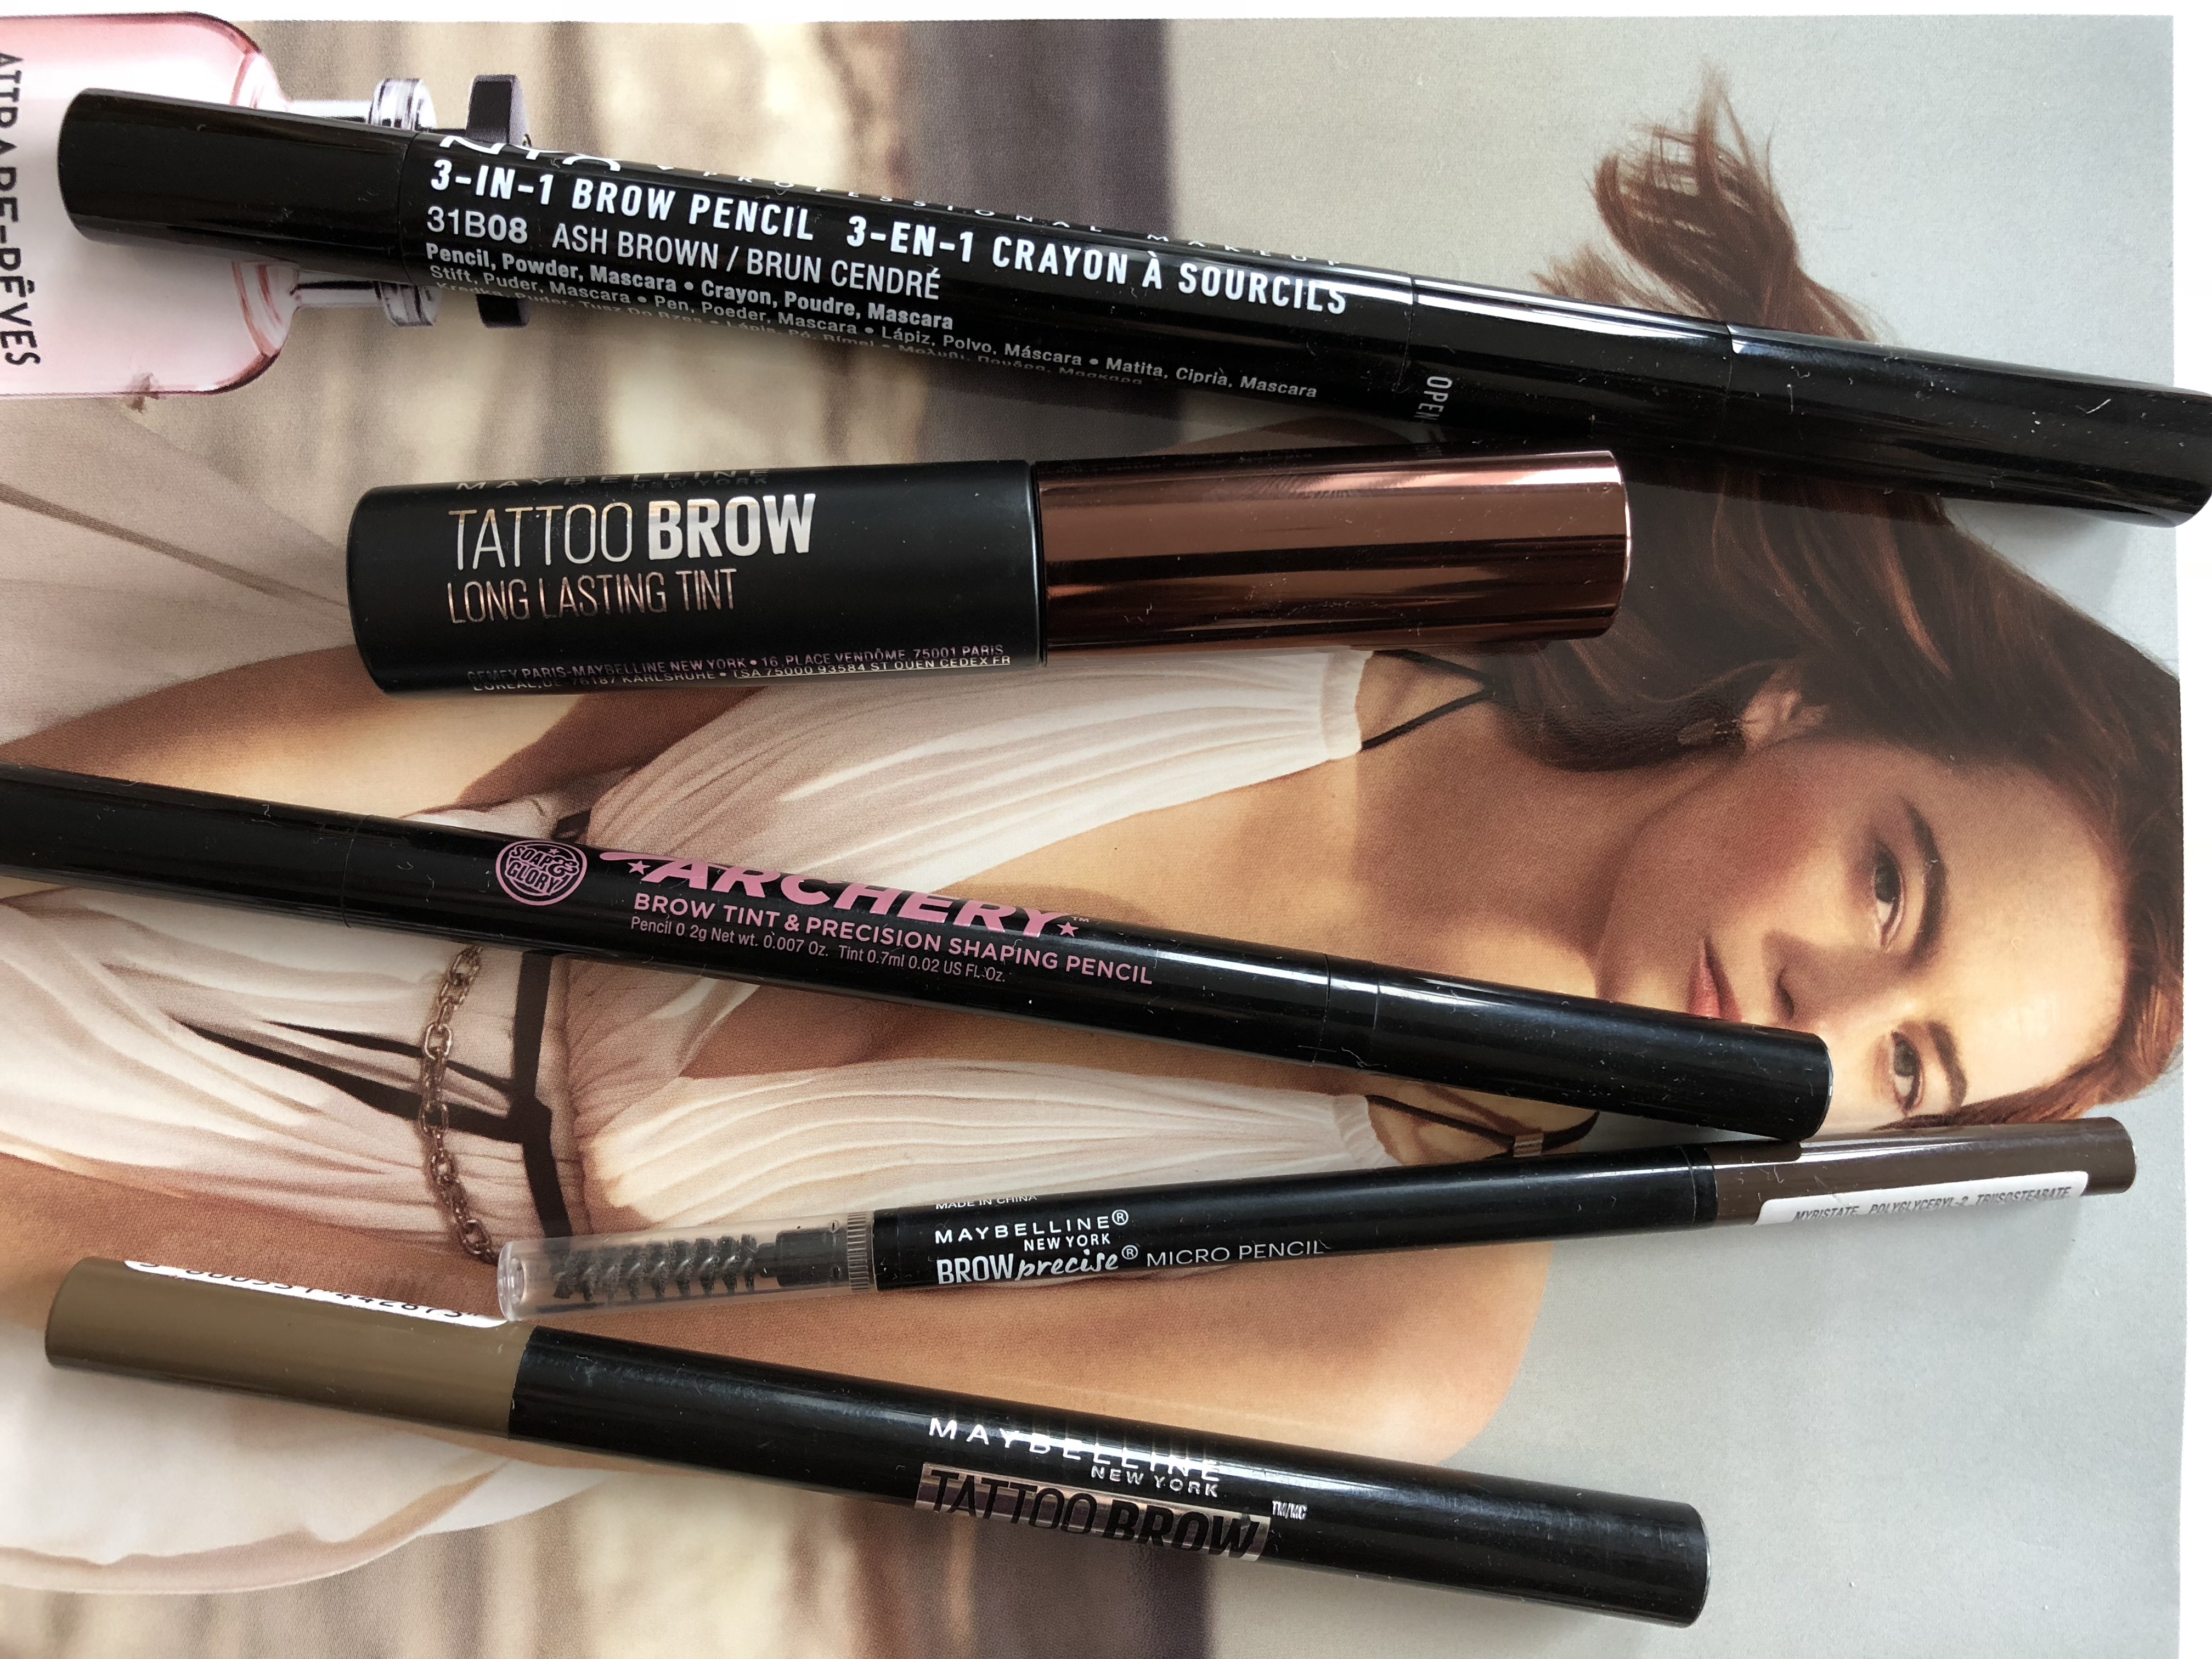 A REVIEW Videos Beauty - OF BROW AFFORDABLE, PRODUCTS Tutorial & Product Makeup Face Up Made LONG-LASTING - Reviews, THE BEST Lifestyle